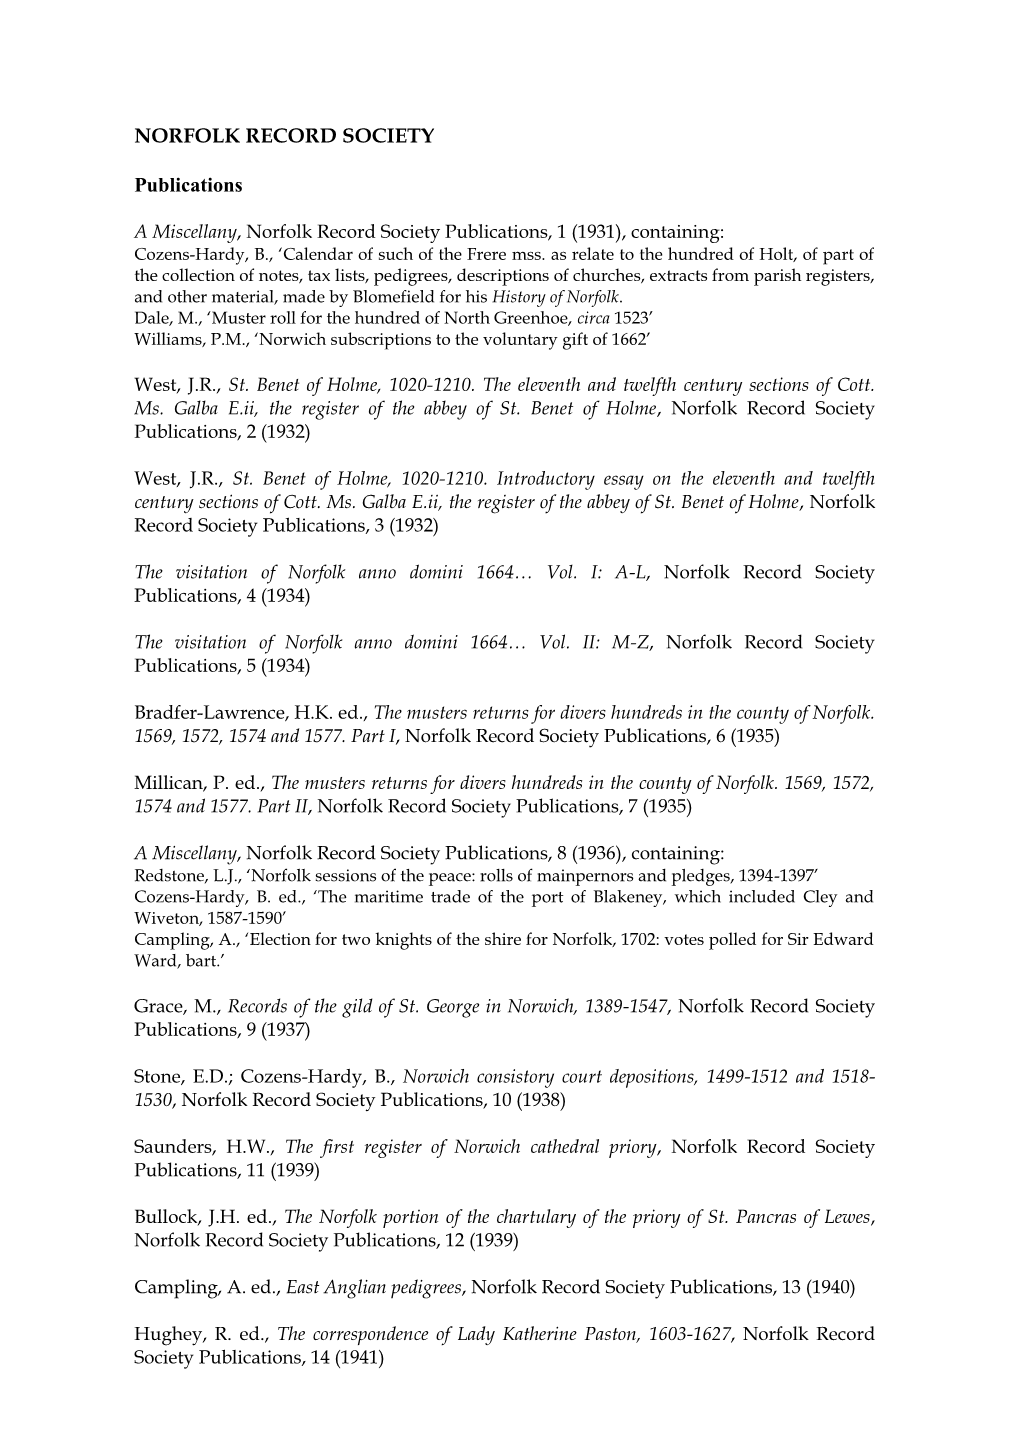 Norfolk Record Society Publications, 1 (1931), Containing: Cozens-Hardy, B., ‘Calendar of Such of the Frere Mss